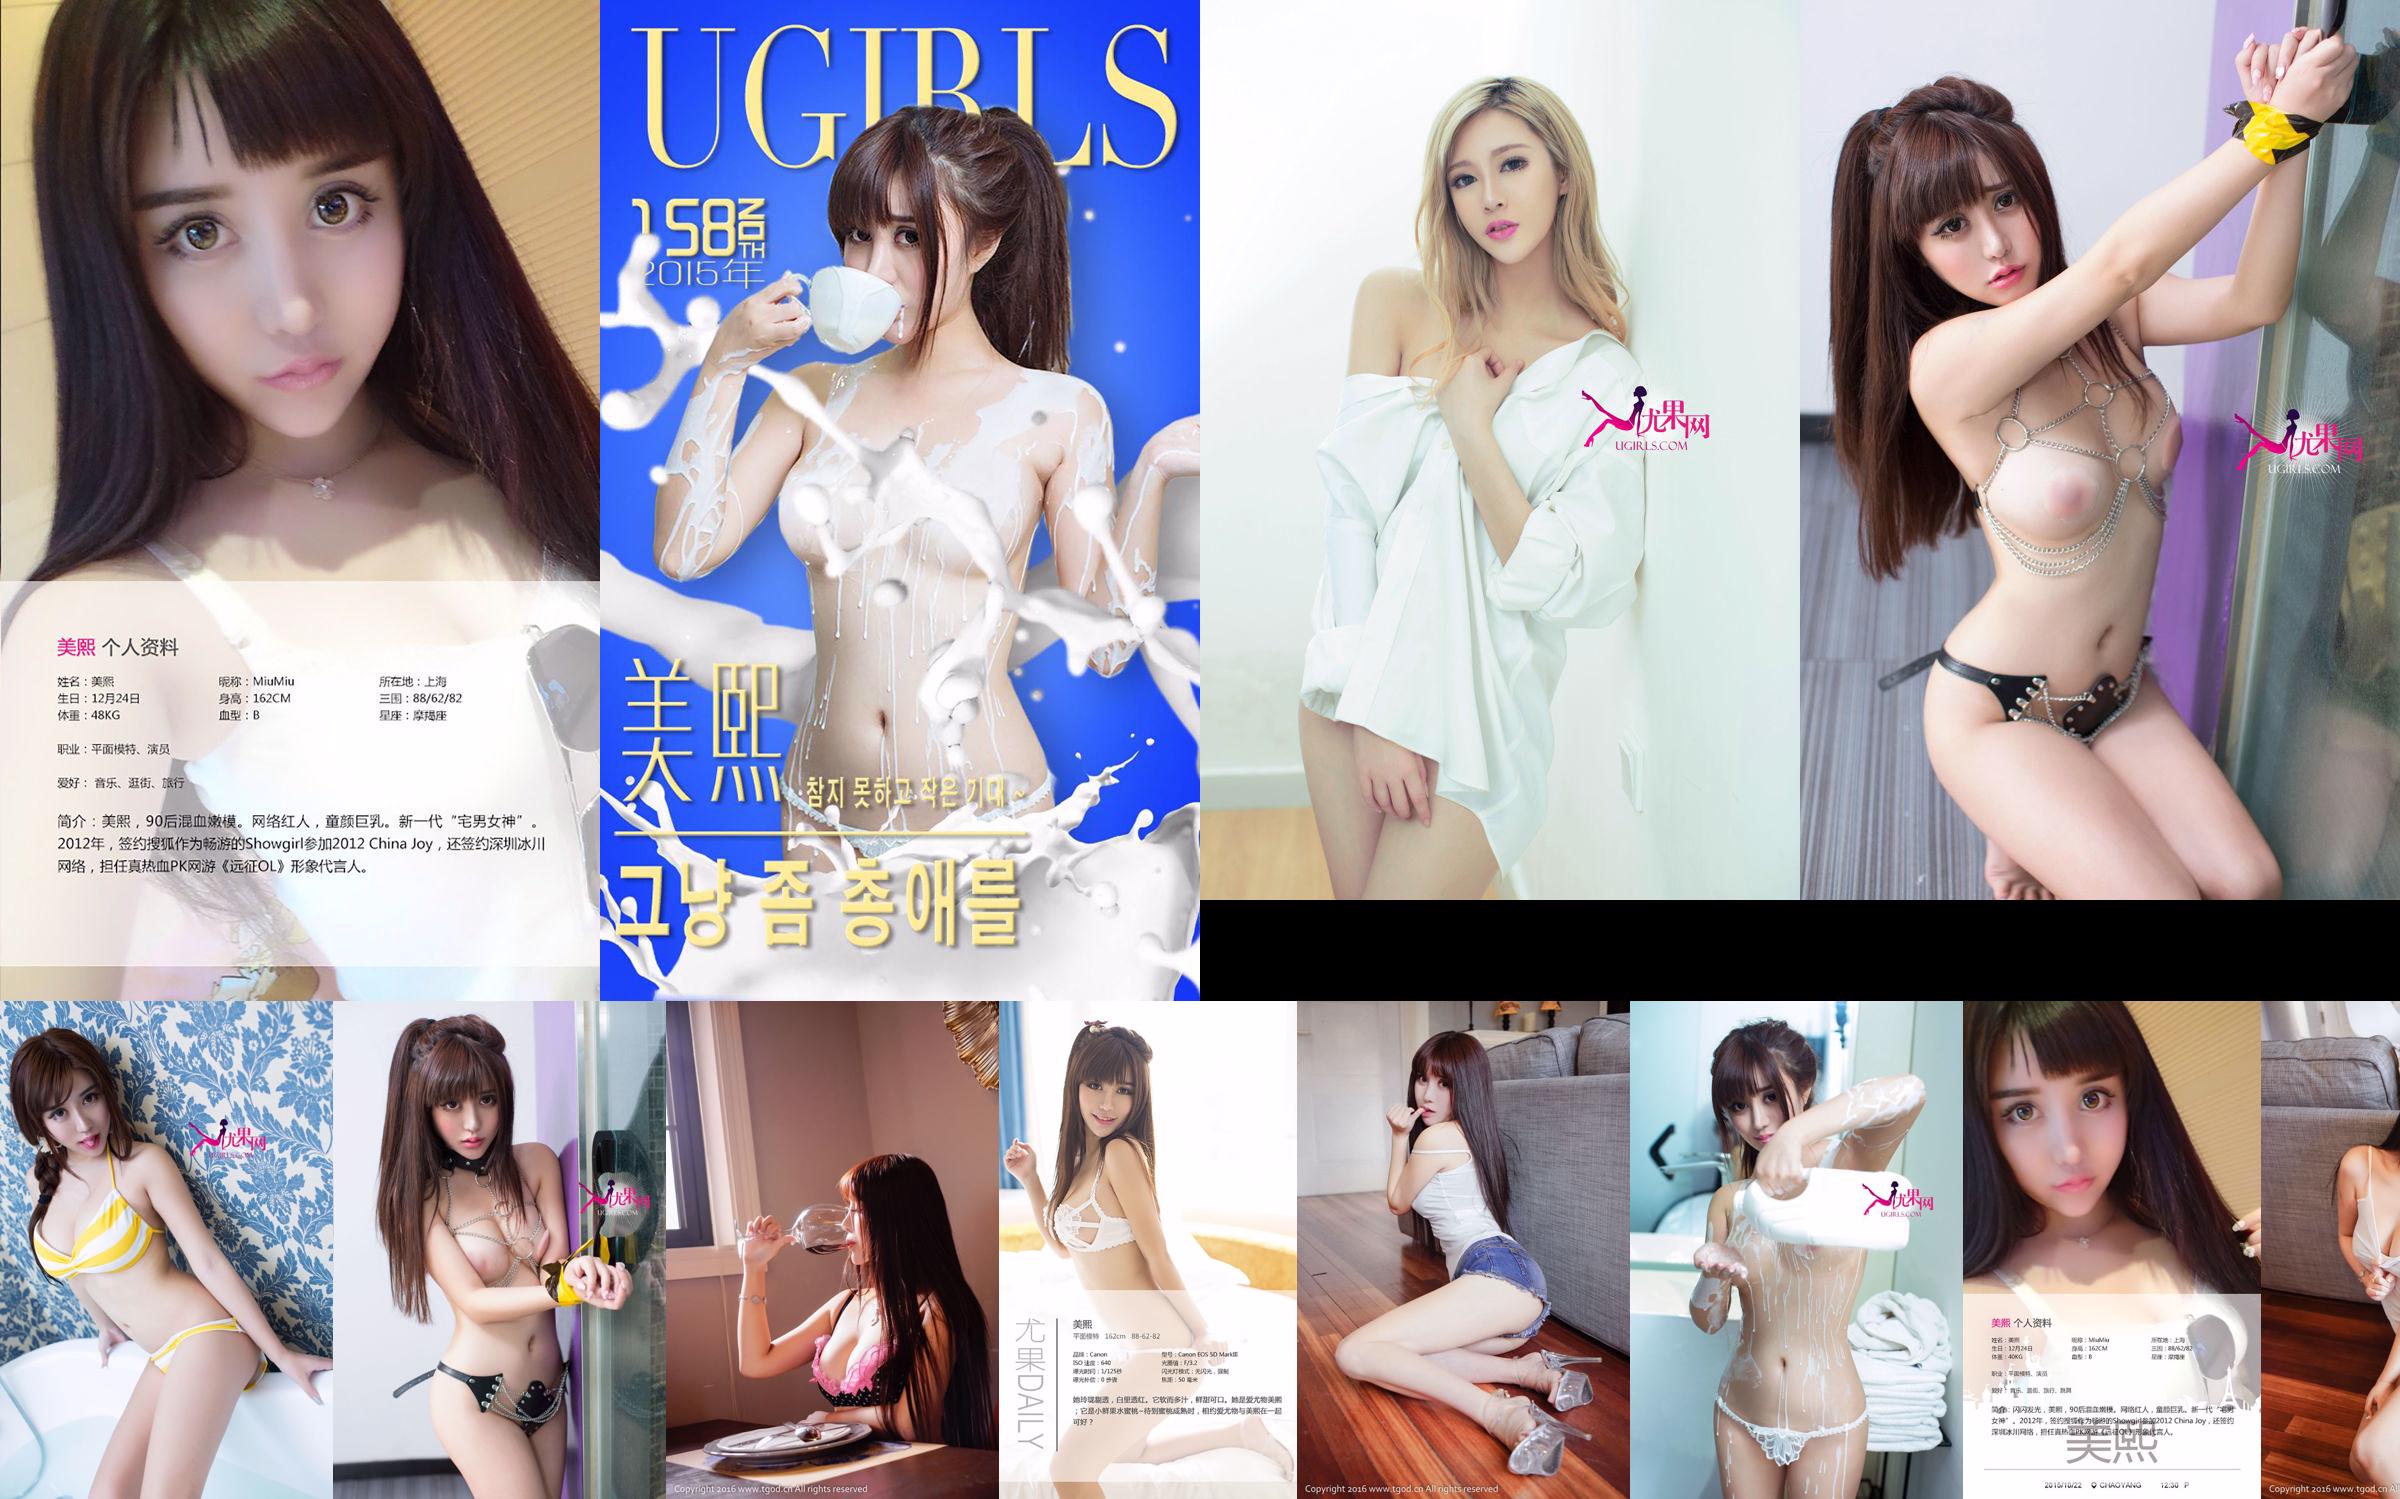 Miu Miu "The Little Expectation That Can't Be Held" [Love Youwu Ugirls] No.158 No.0a5c0d Pagina 1